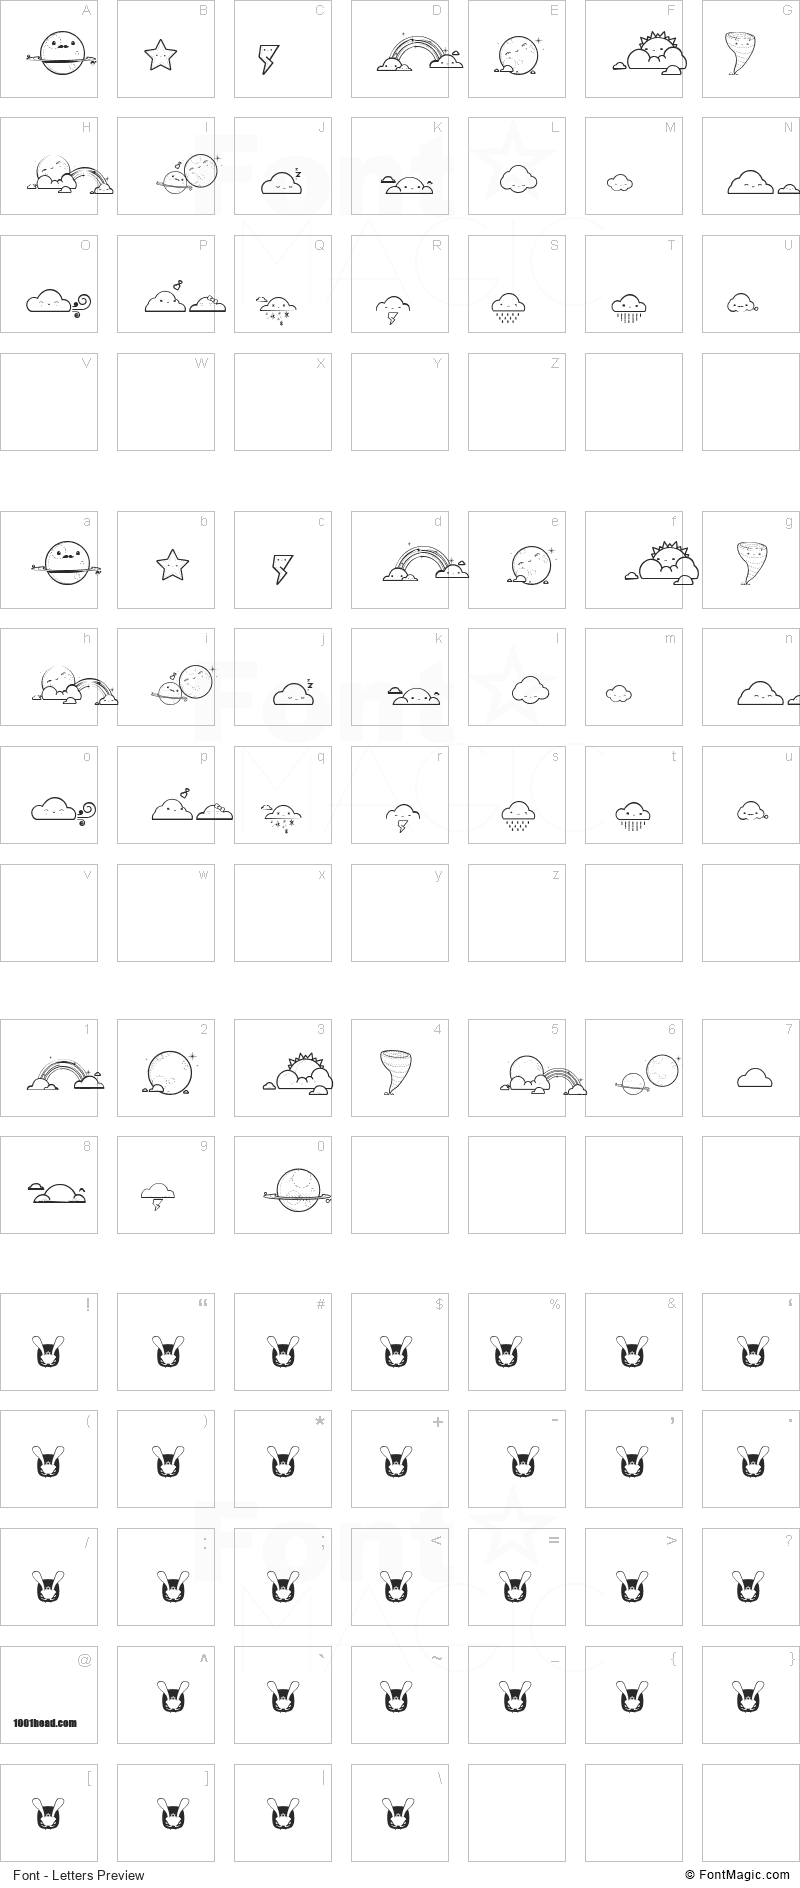 Toy Cloud Font - All Latters Preview Chart